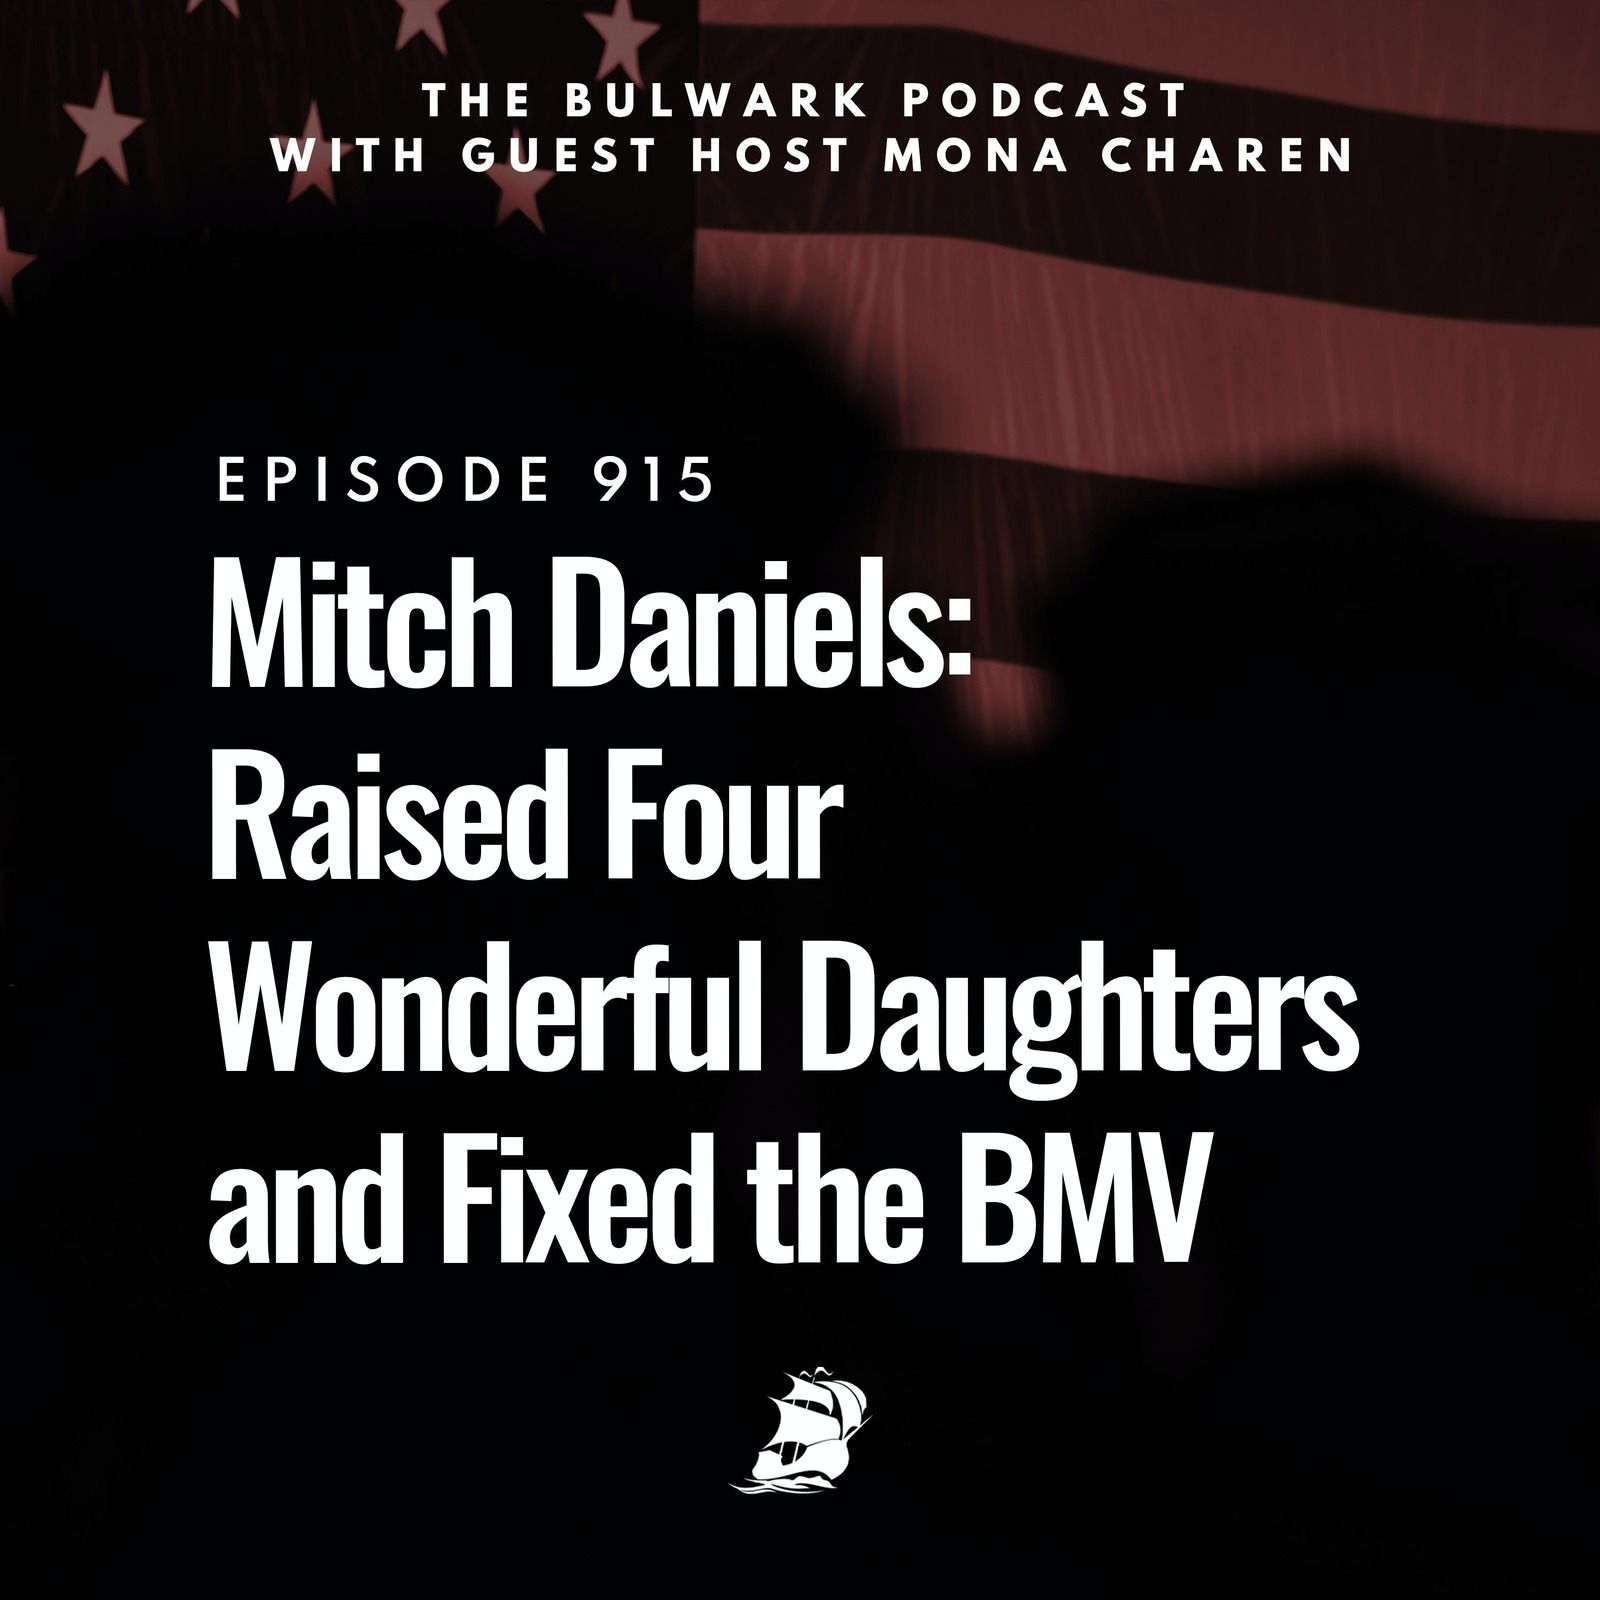 Mitch Daniels: Raised Four Wonderful Daughters and Fixed the BMV by The Bulwark Podcast